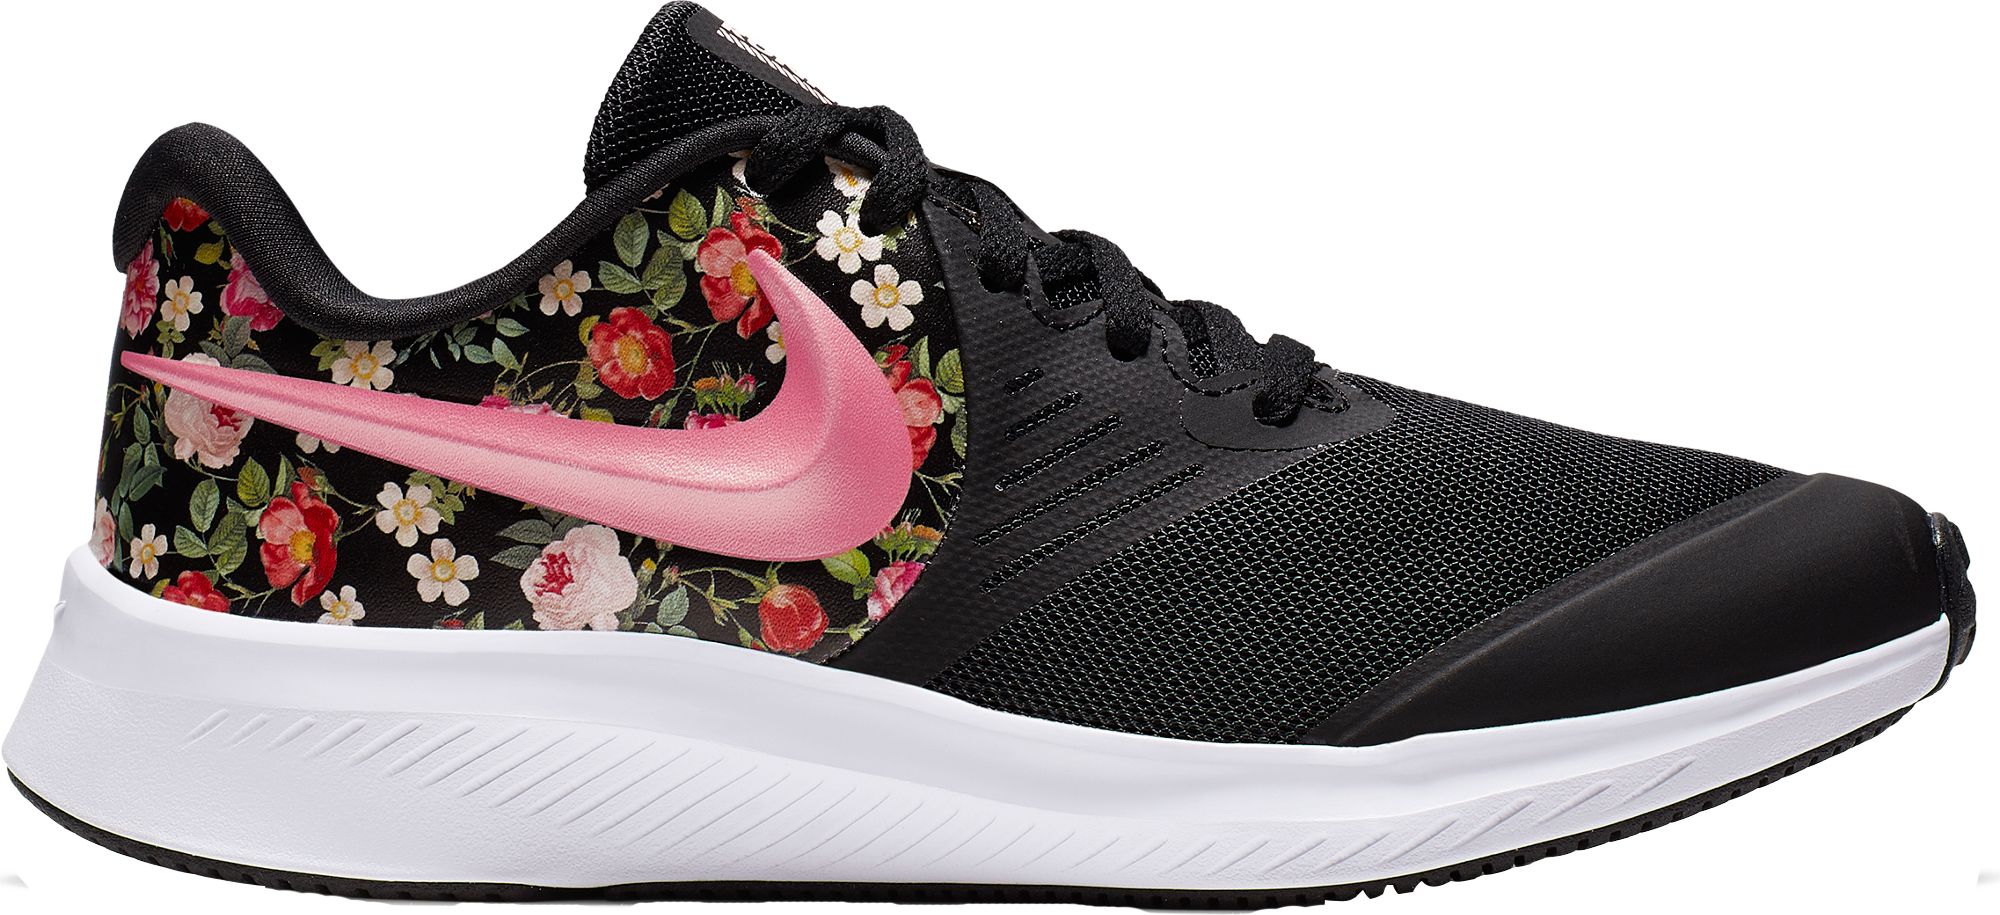 nike shoes floral